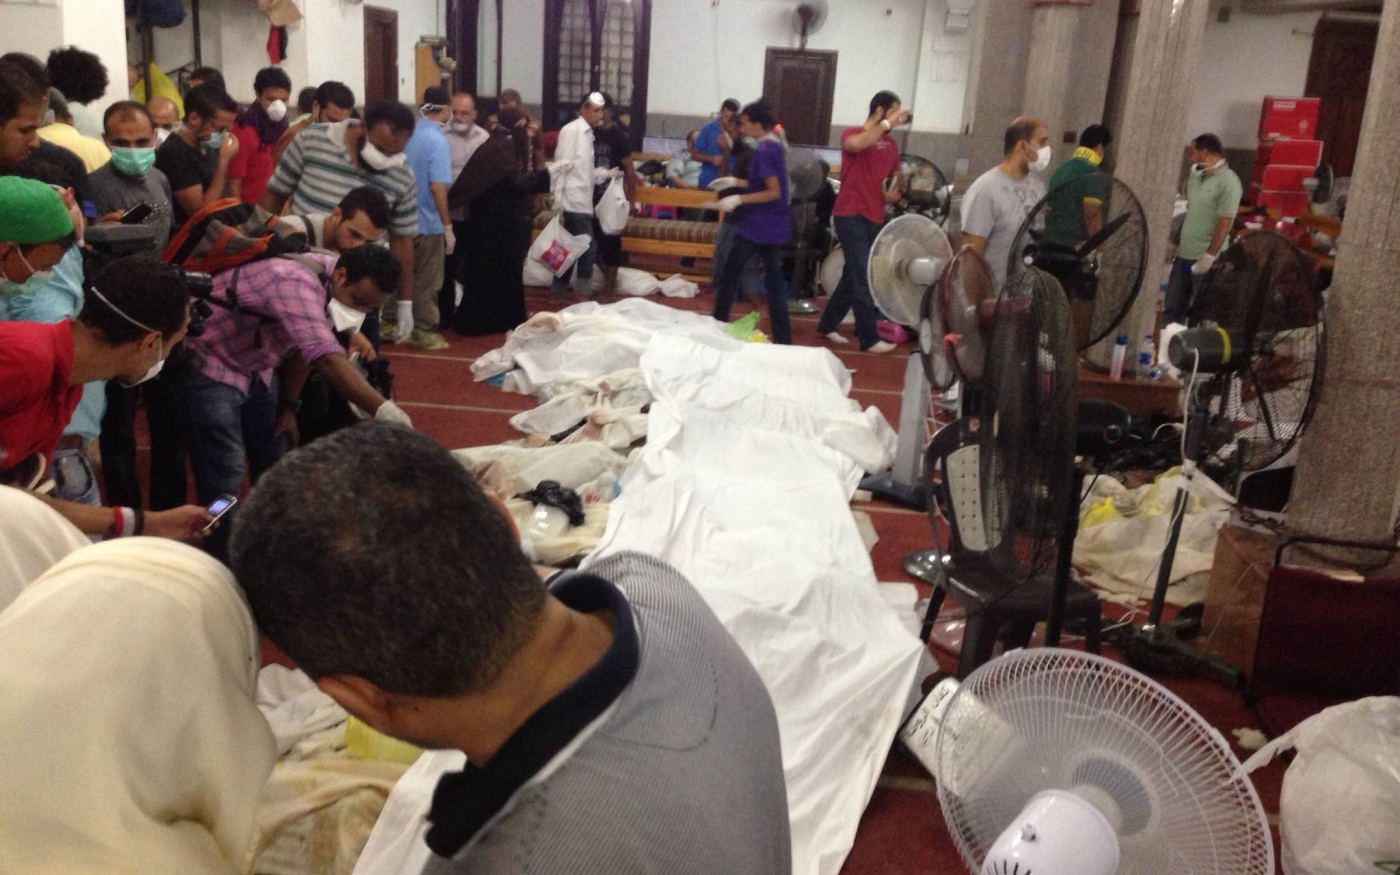 Row of bodies in El-Eman mosque used as a make-shift morgue 